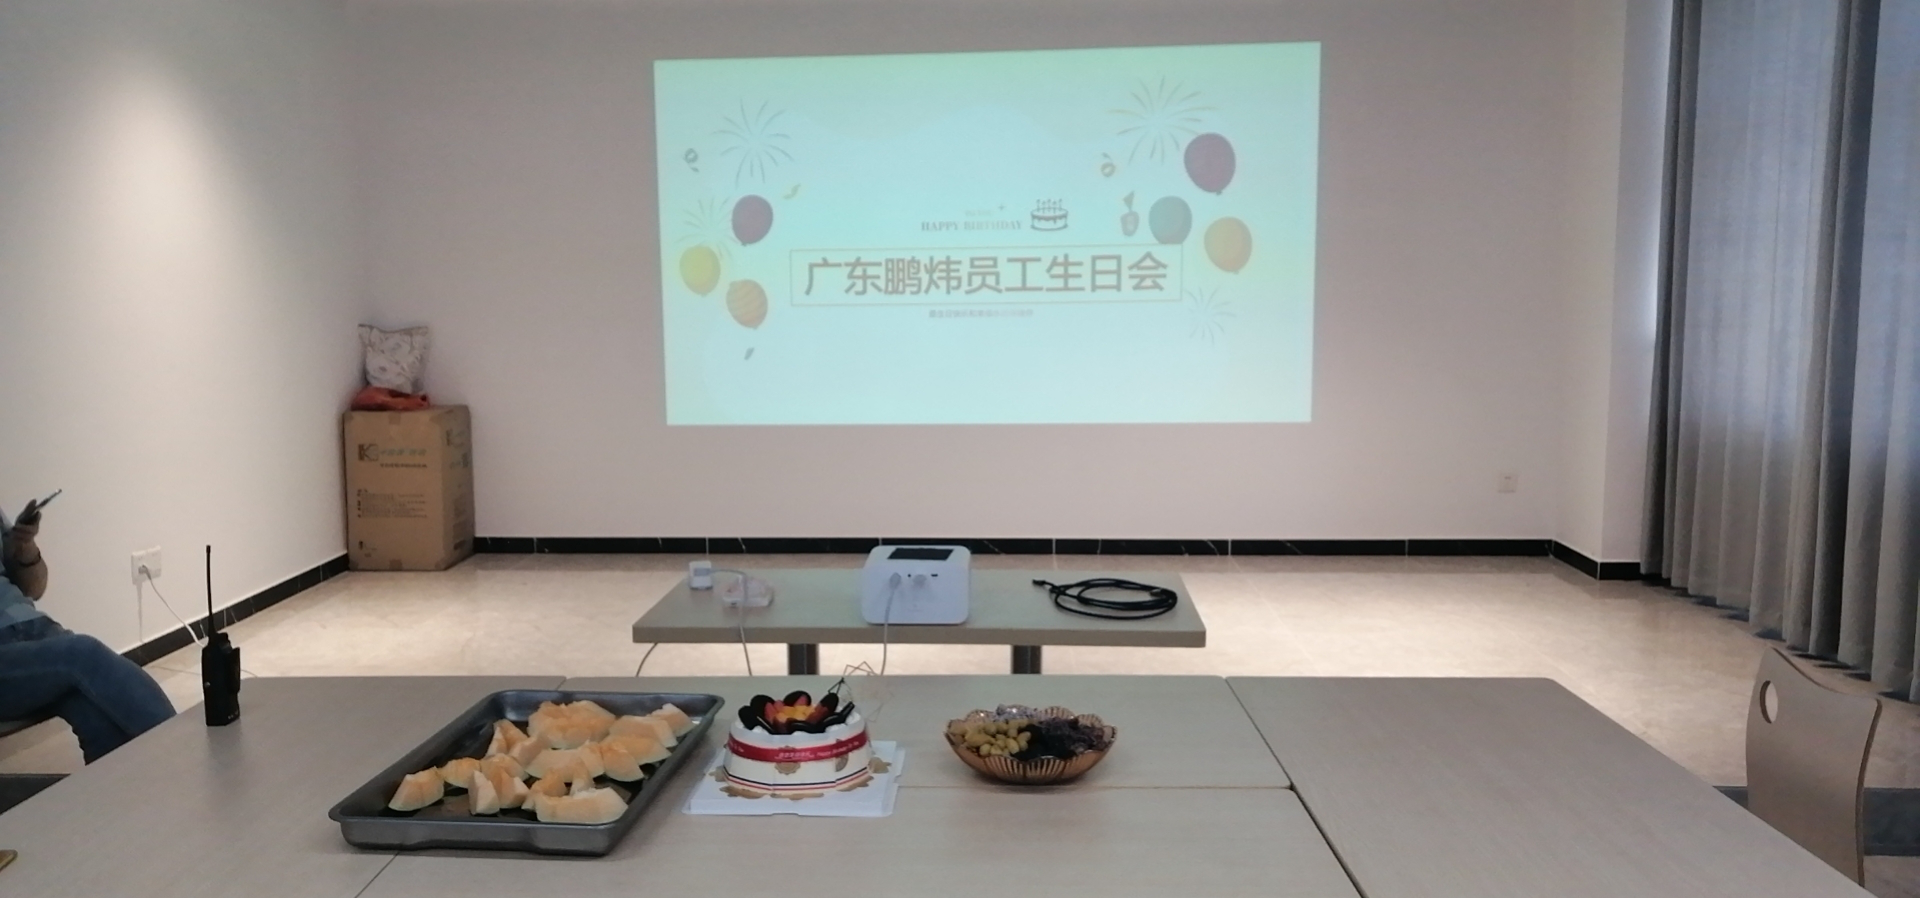 Birthday Party for Employees (1)